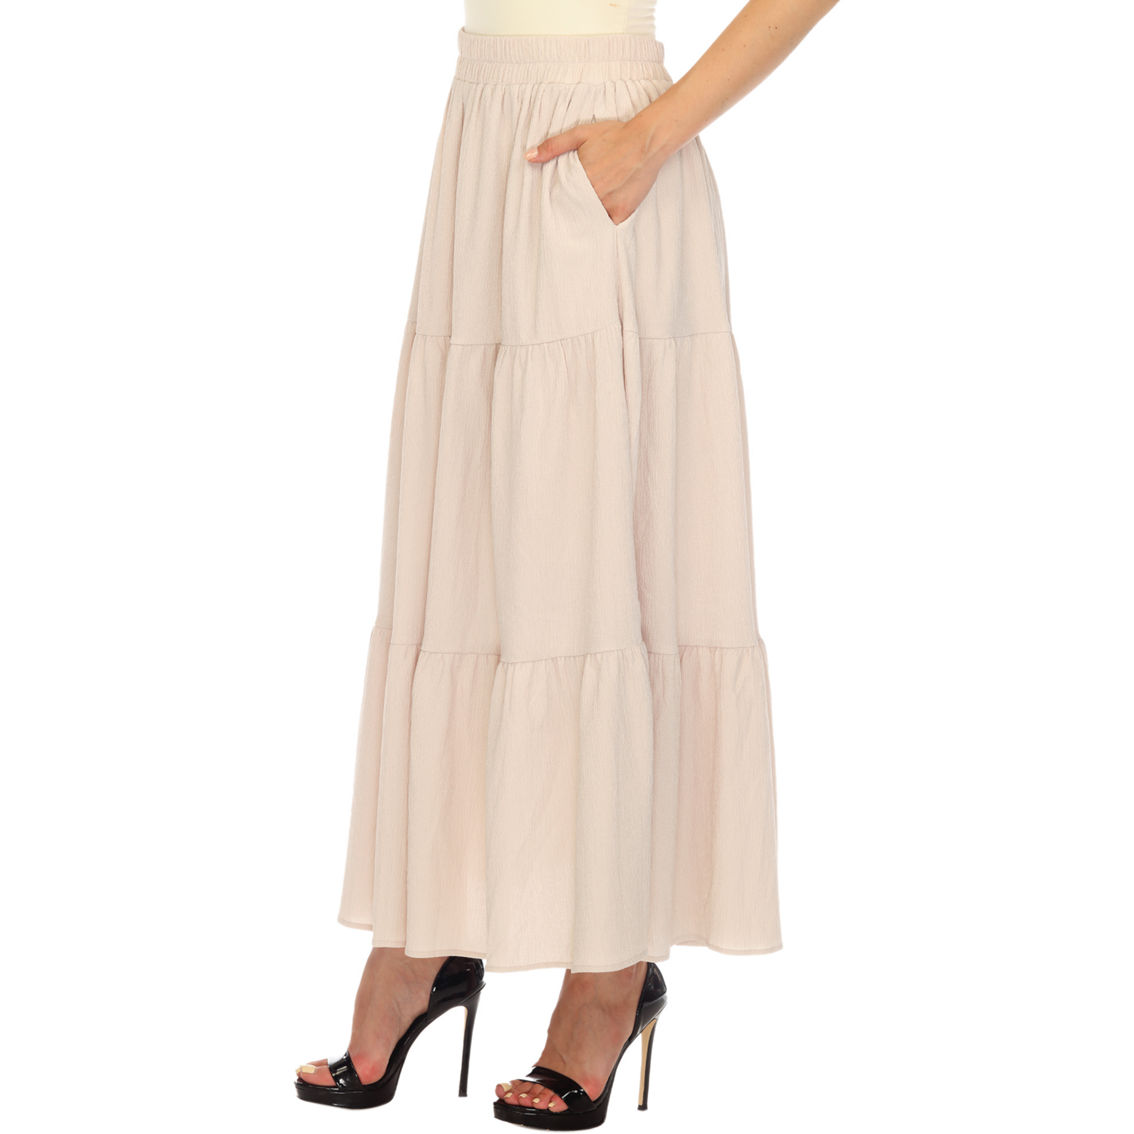 White Mark Pleated Tiered Maxi Skirt - Image 3 of 5